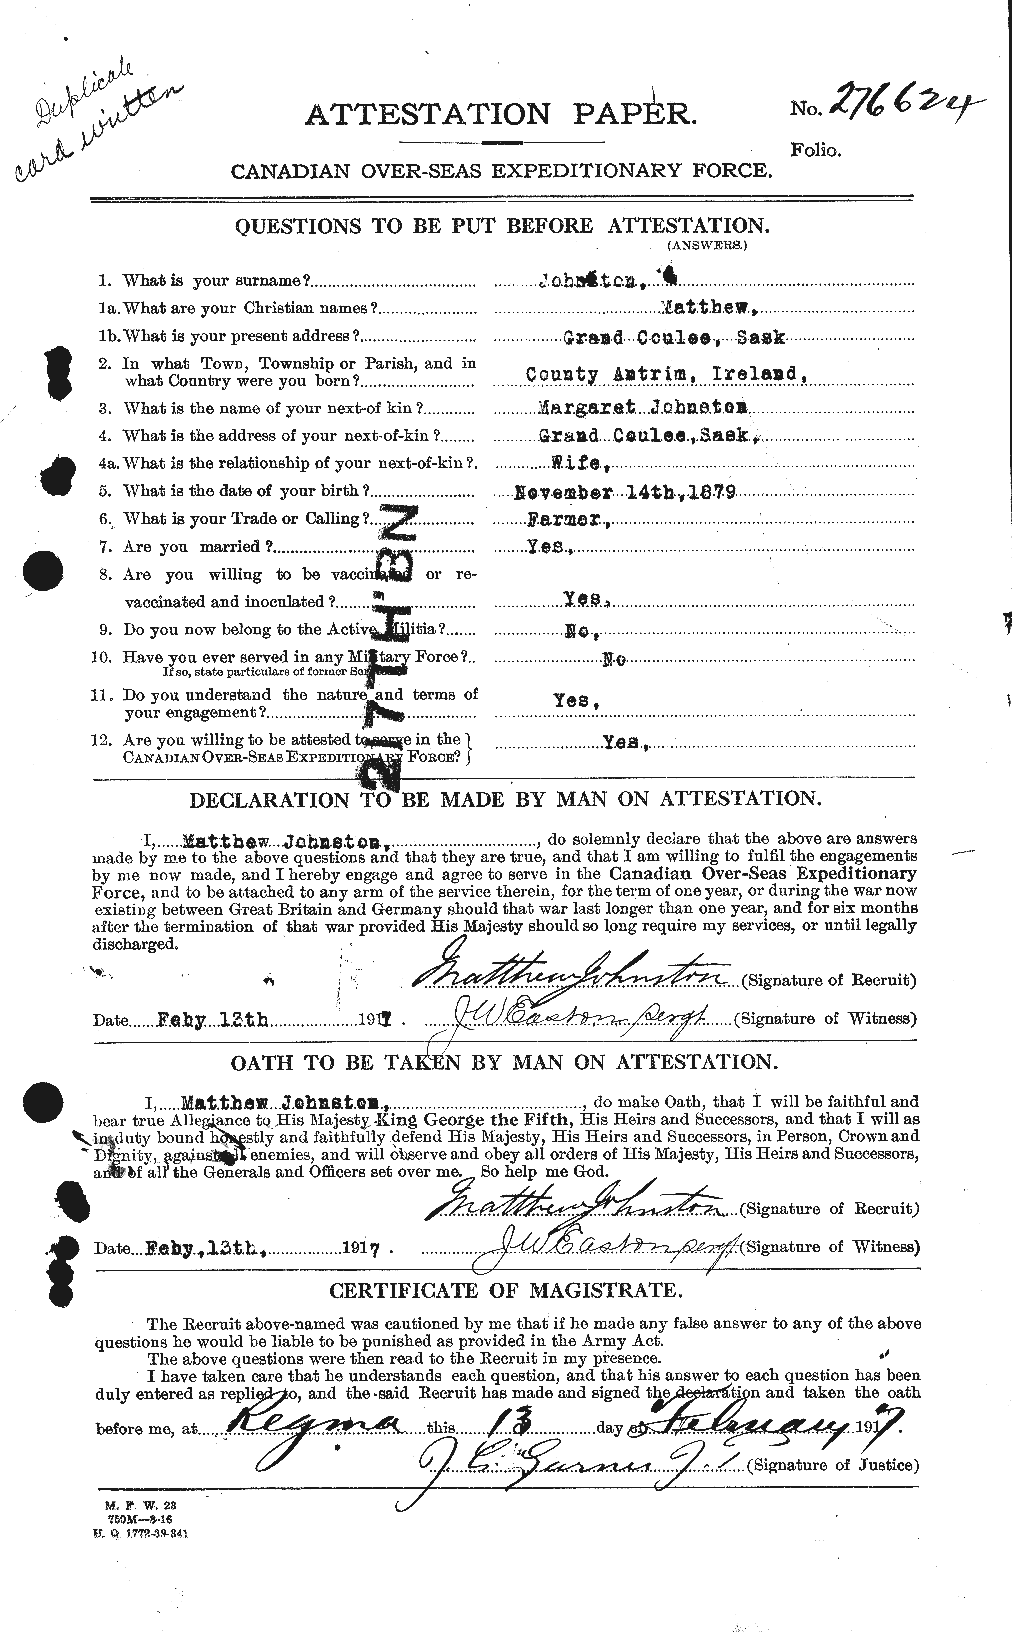 Personnel Records of the First World War - CEF 422978a